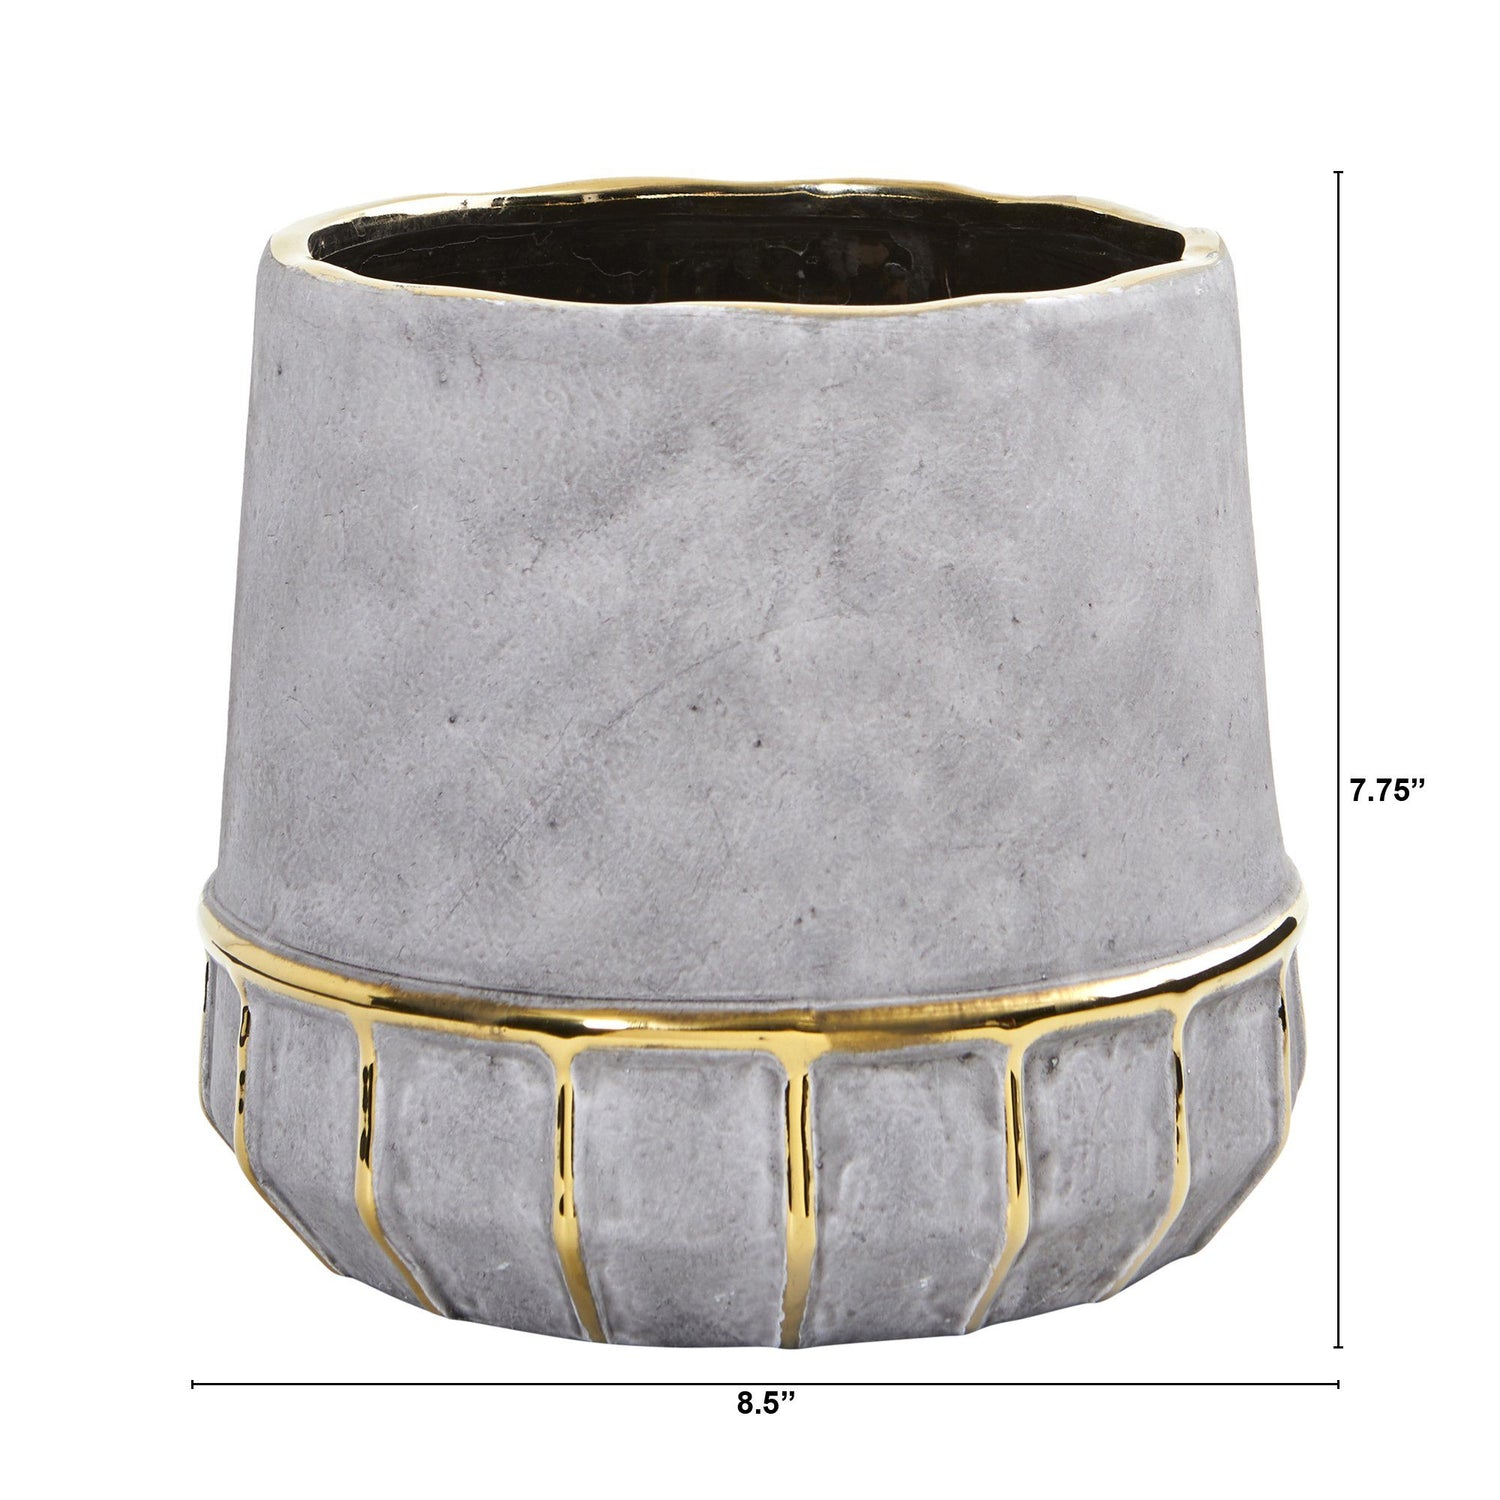 8.5” Regal Stone Decorative Planter with Gold Accents